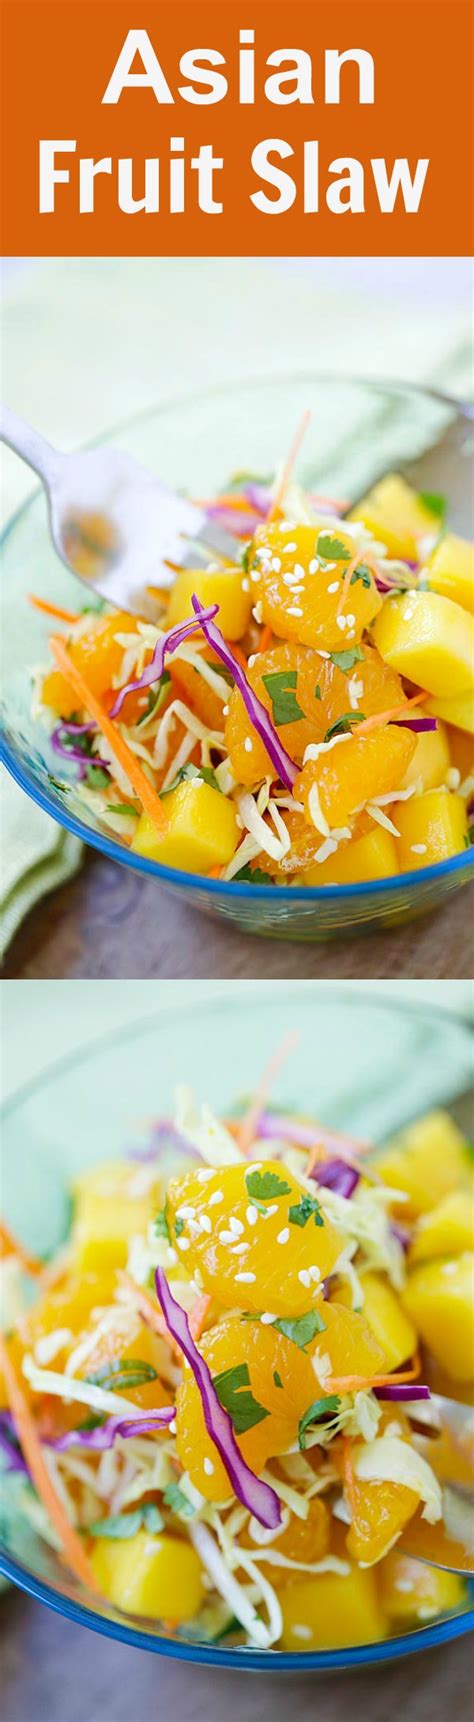 Asian Fruit Slaw Healthy Low Calorie And Delicious Asian Fruit